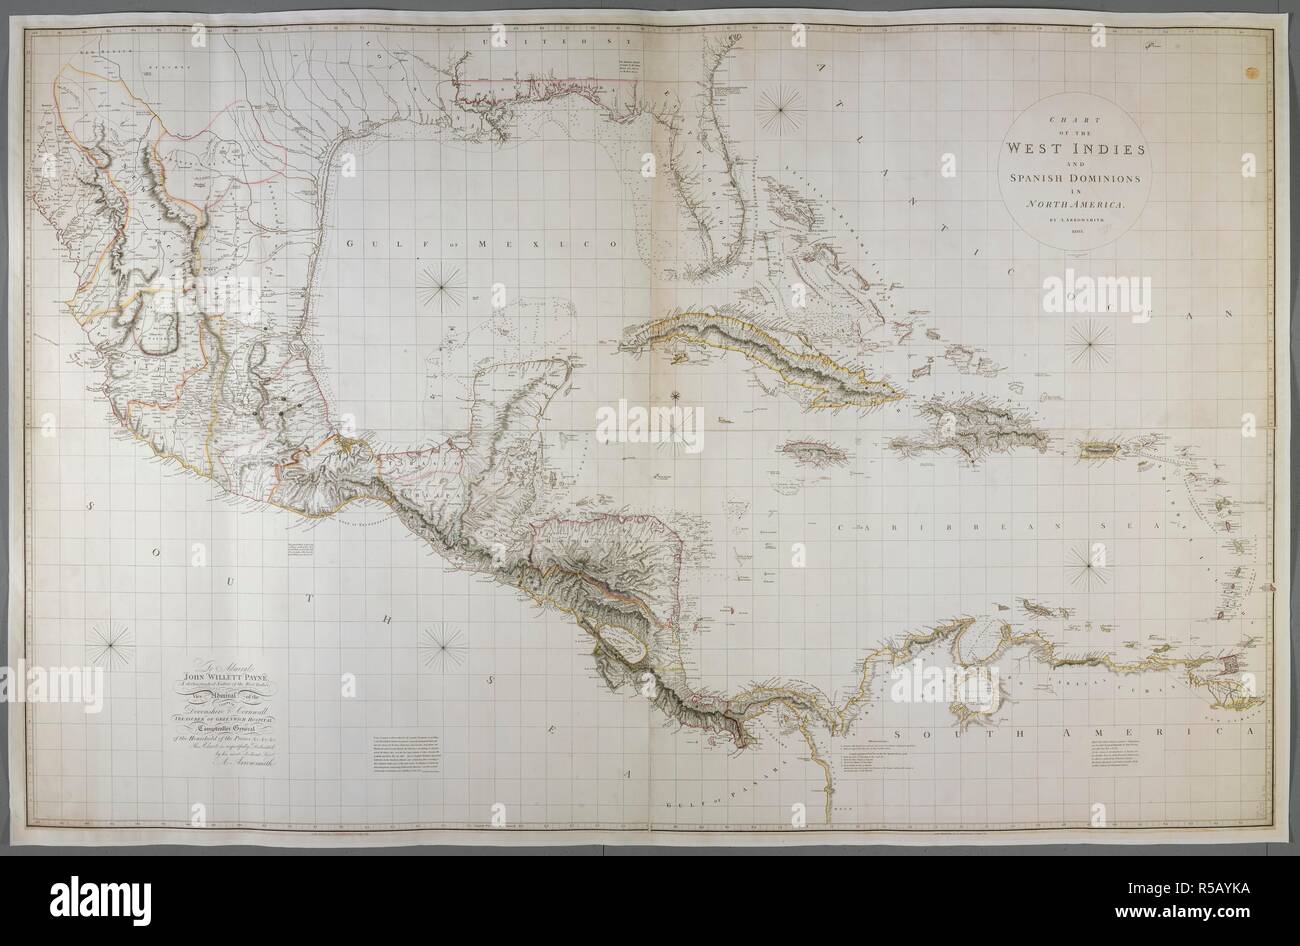 A chart of the West Indies and Spanish Dominions in North America. CHART OF THE WEST INDIES AND SPANISH DOMINIONS IN NORTH AMERICA. London : A. Arrowsmith No. 24 Rathbone Place., June 1st, 1803. Source: Maps K.Top.123.15.2 TAB. Language: English. Author: Arrowsmith, Aaron. Stock Photo